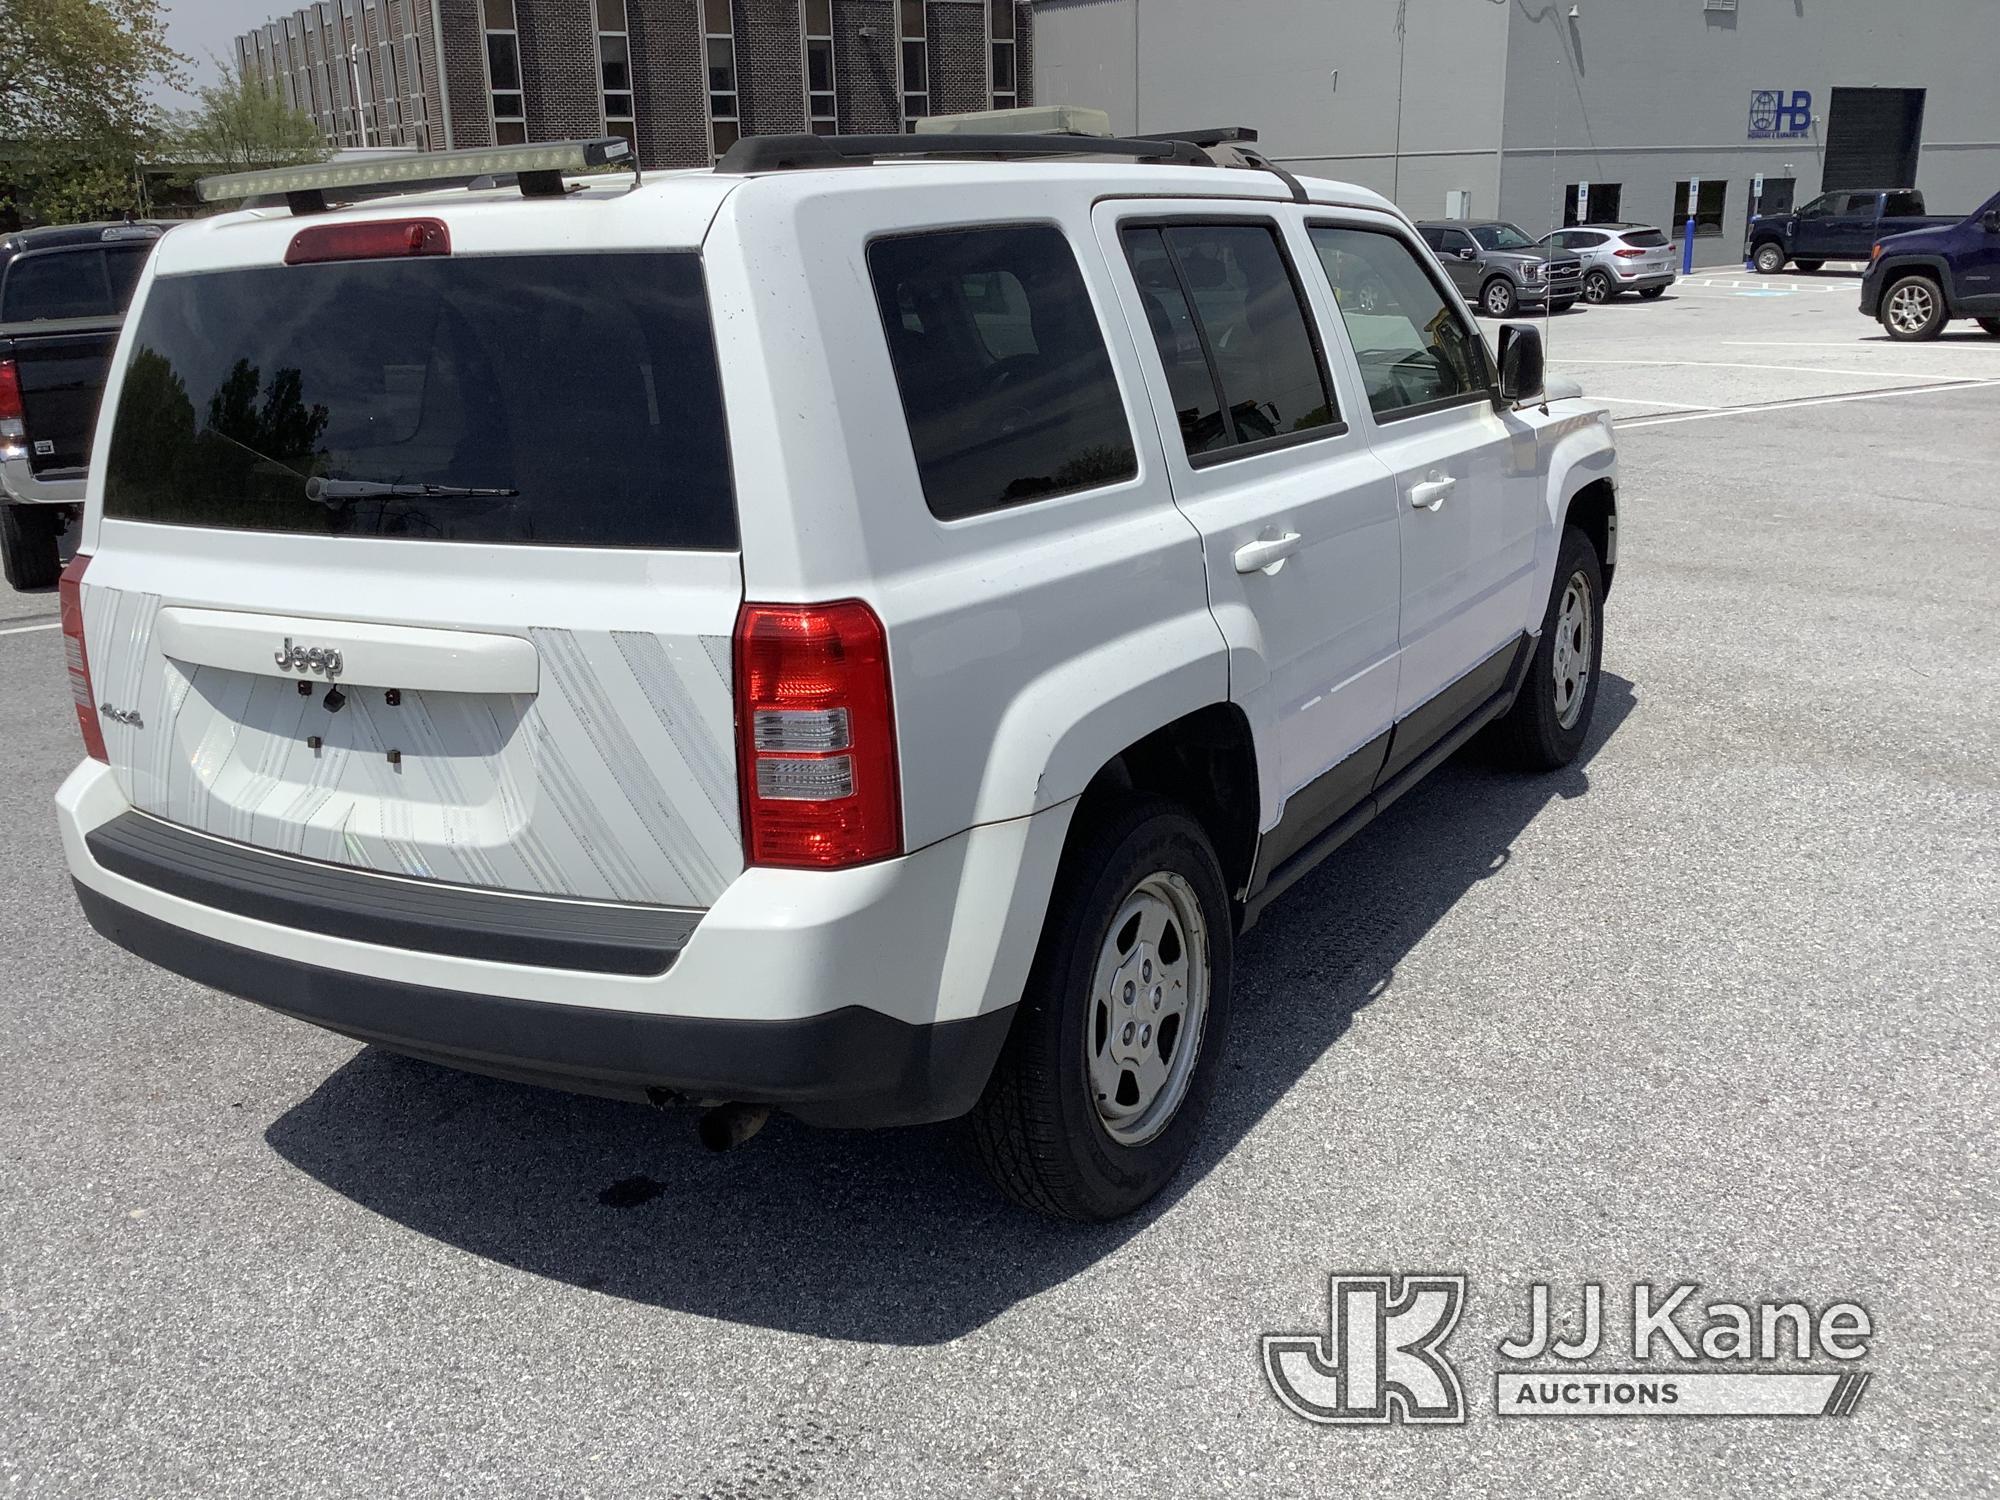 (Chester Springs, PA) 2016 Jeep Patriot 4x4 4-Door Sport Utility Vehicle Runs & Moves, Cracked Front